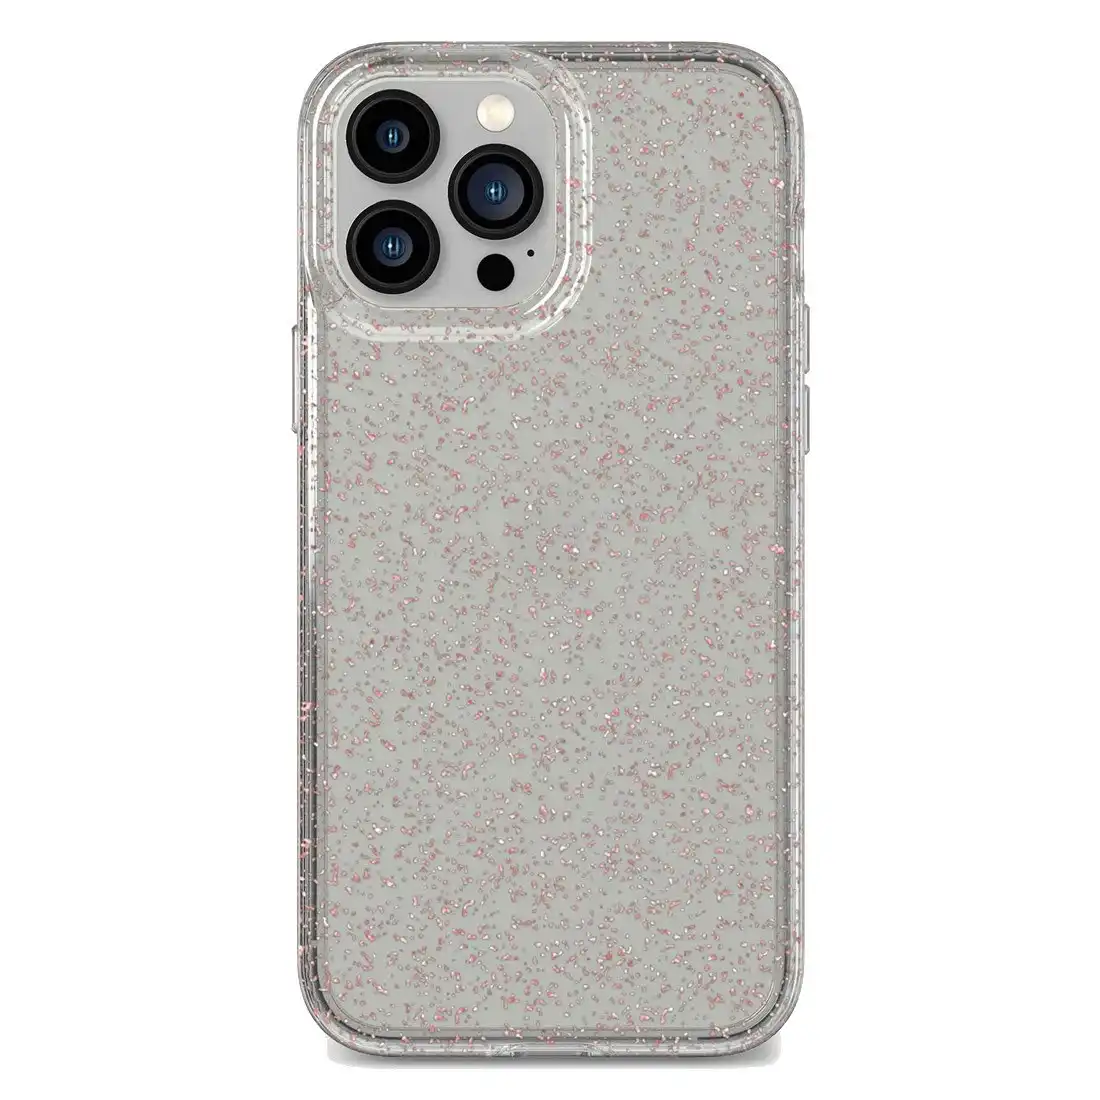 Tech21 Evo Sparkle Case for iPhone 13 Pro T21-9214 - Rose Gold